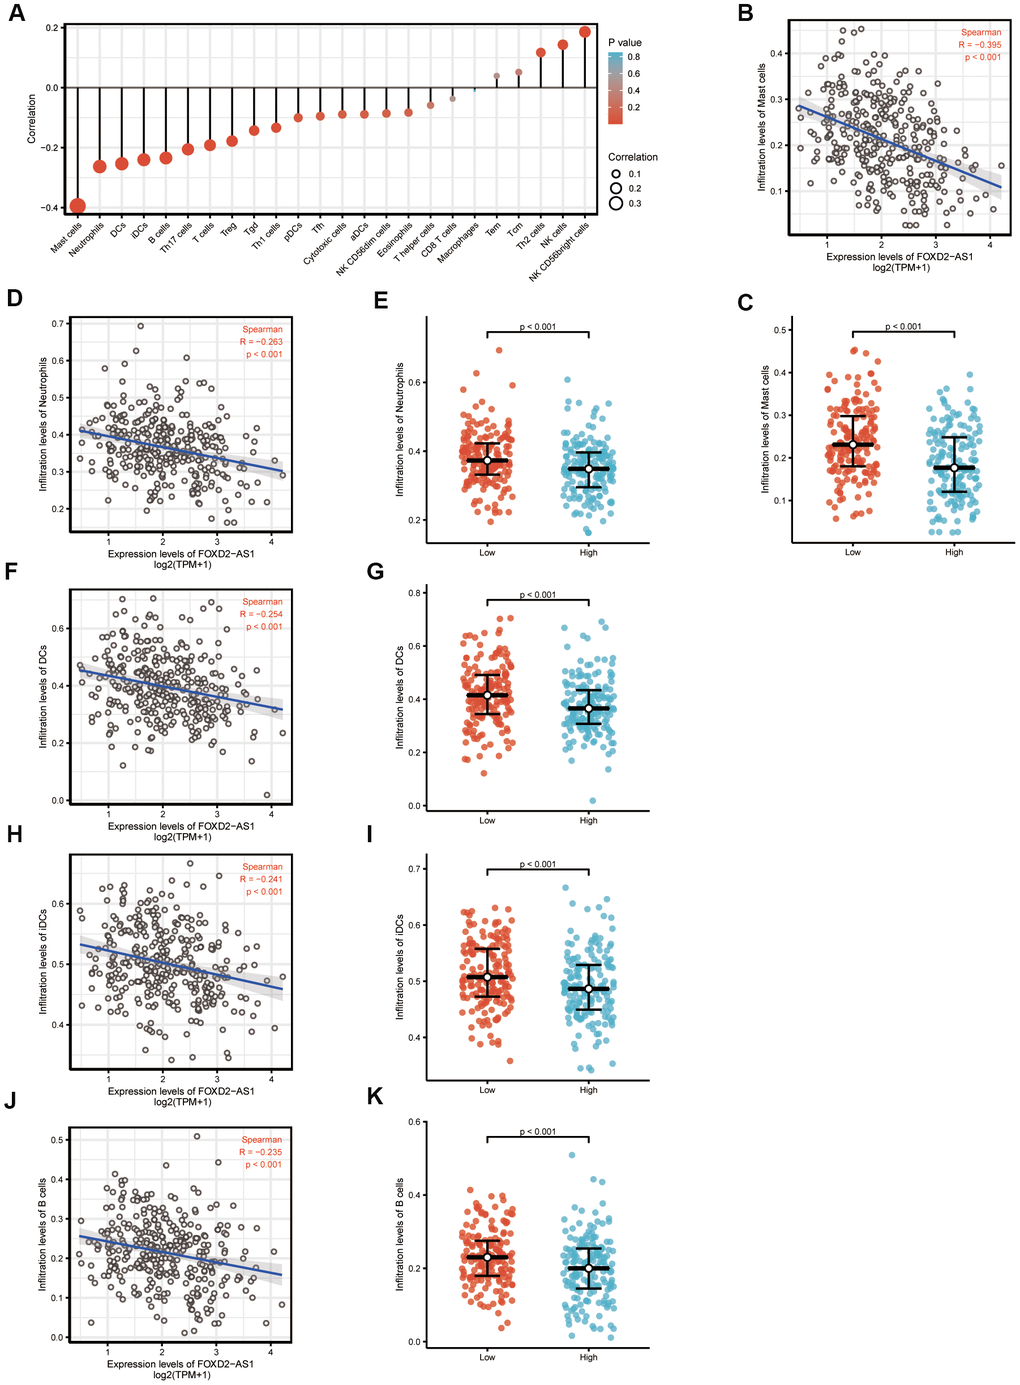 The expression level of FOXD2-AS1 was associated with the immune infiltration in tumor environment. (A) The plots showed the correlation between FOXD2-AS1 expression and immune cells subsets. (B) Spearman correlation between expression of FOXD2-AS1 and mast cells. (C)The plots of mast cells expression in low and high FOXD2-AS1 samples. (D–K) Spearman correlation and expression distribution of Neutrophils, DC cells, iDC cells and B cells in low and high FOXD2-AS1 samples.